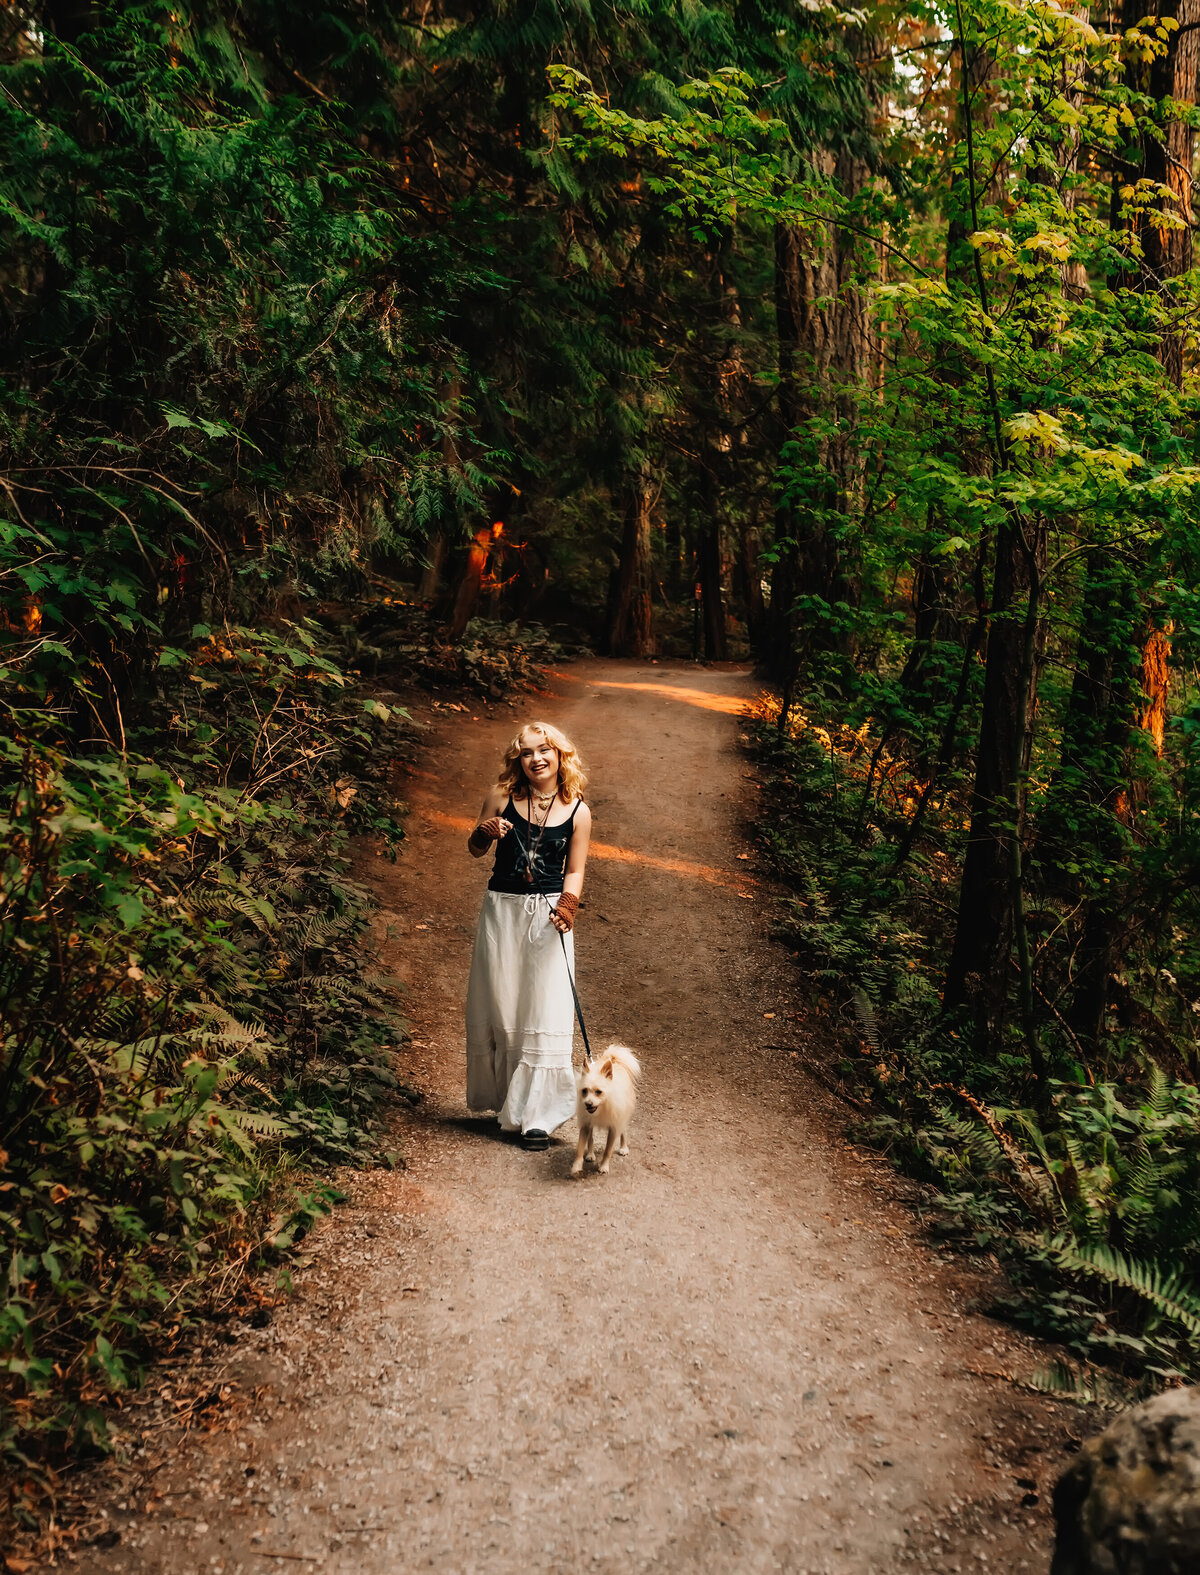 Girl walking dog in forest